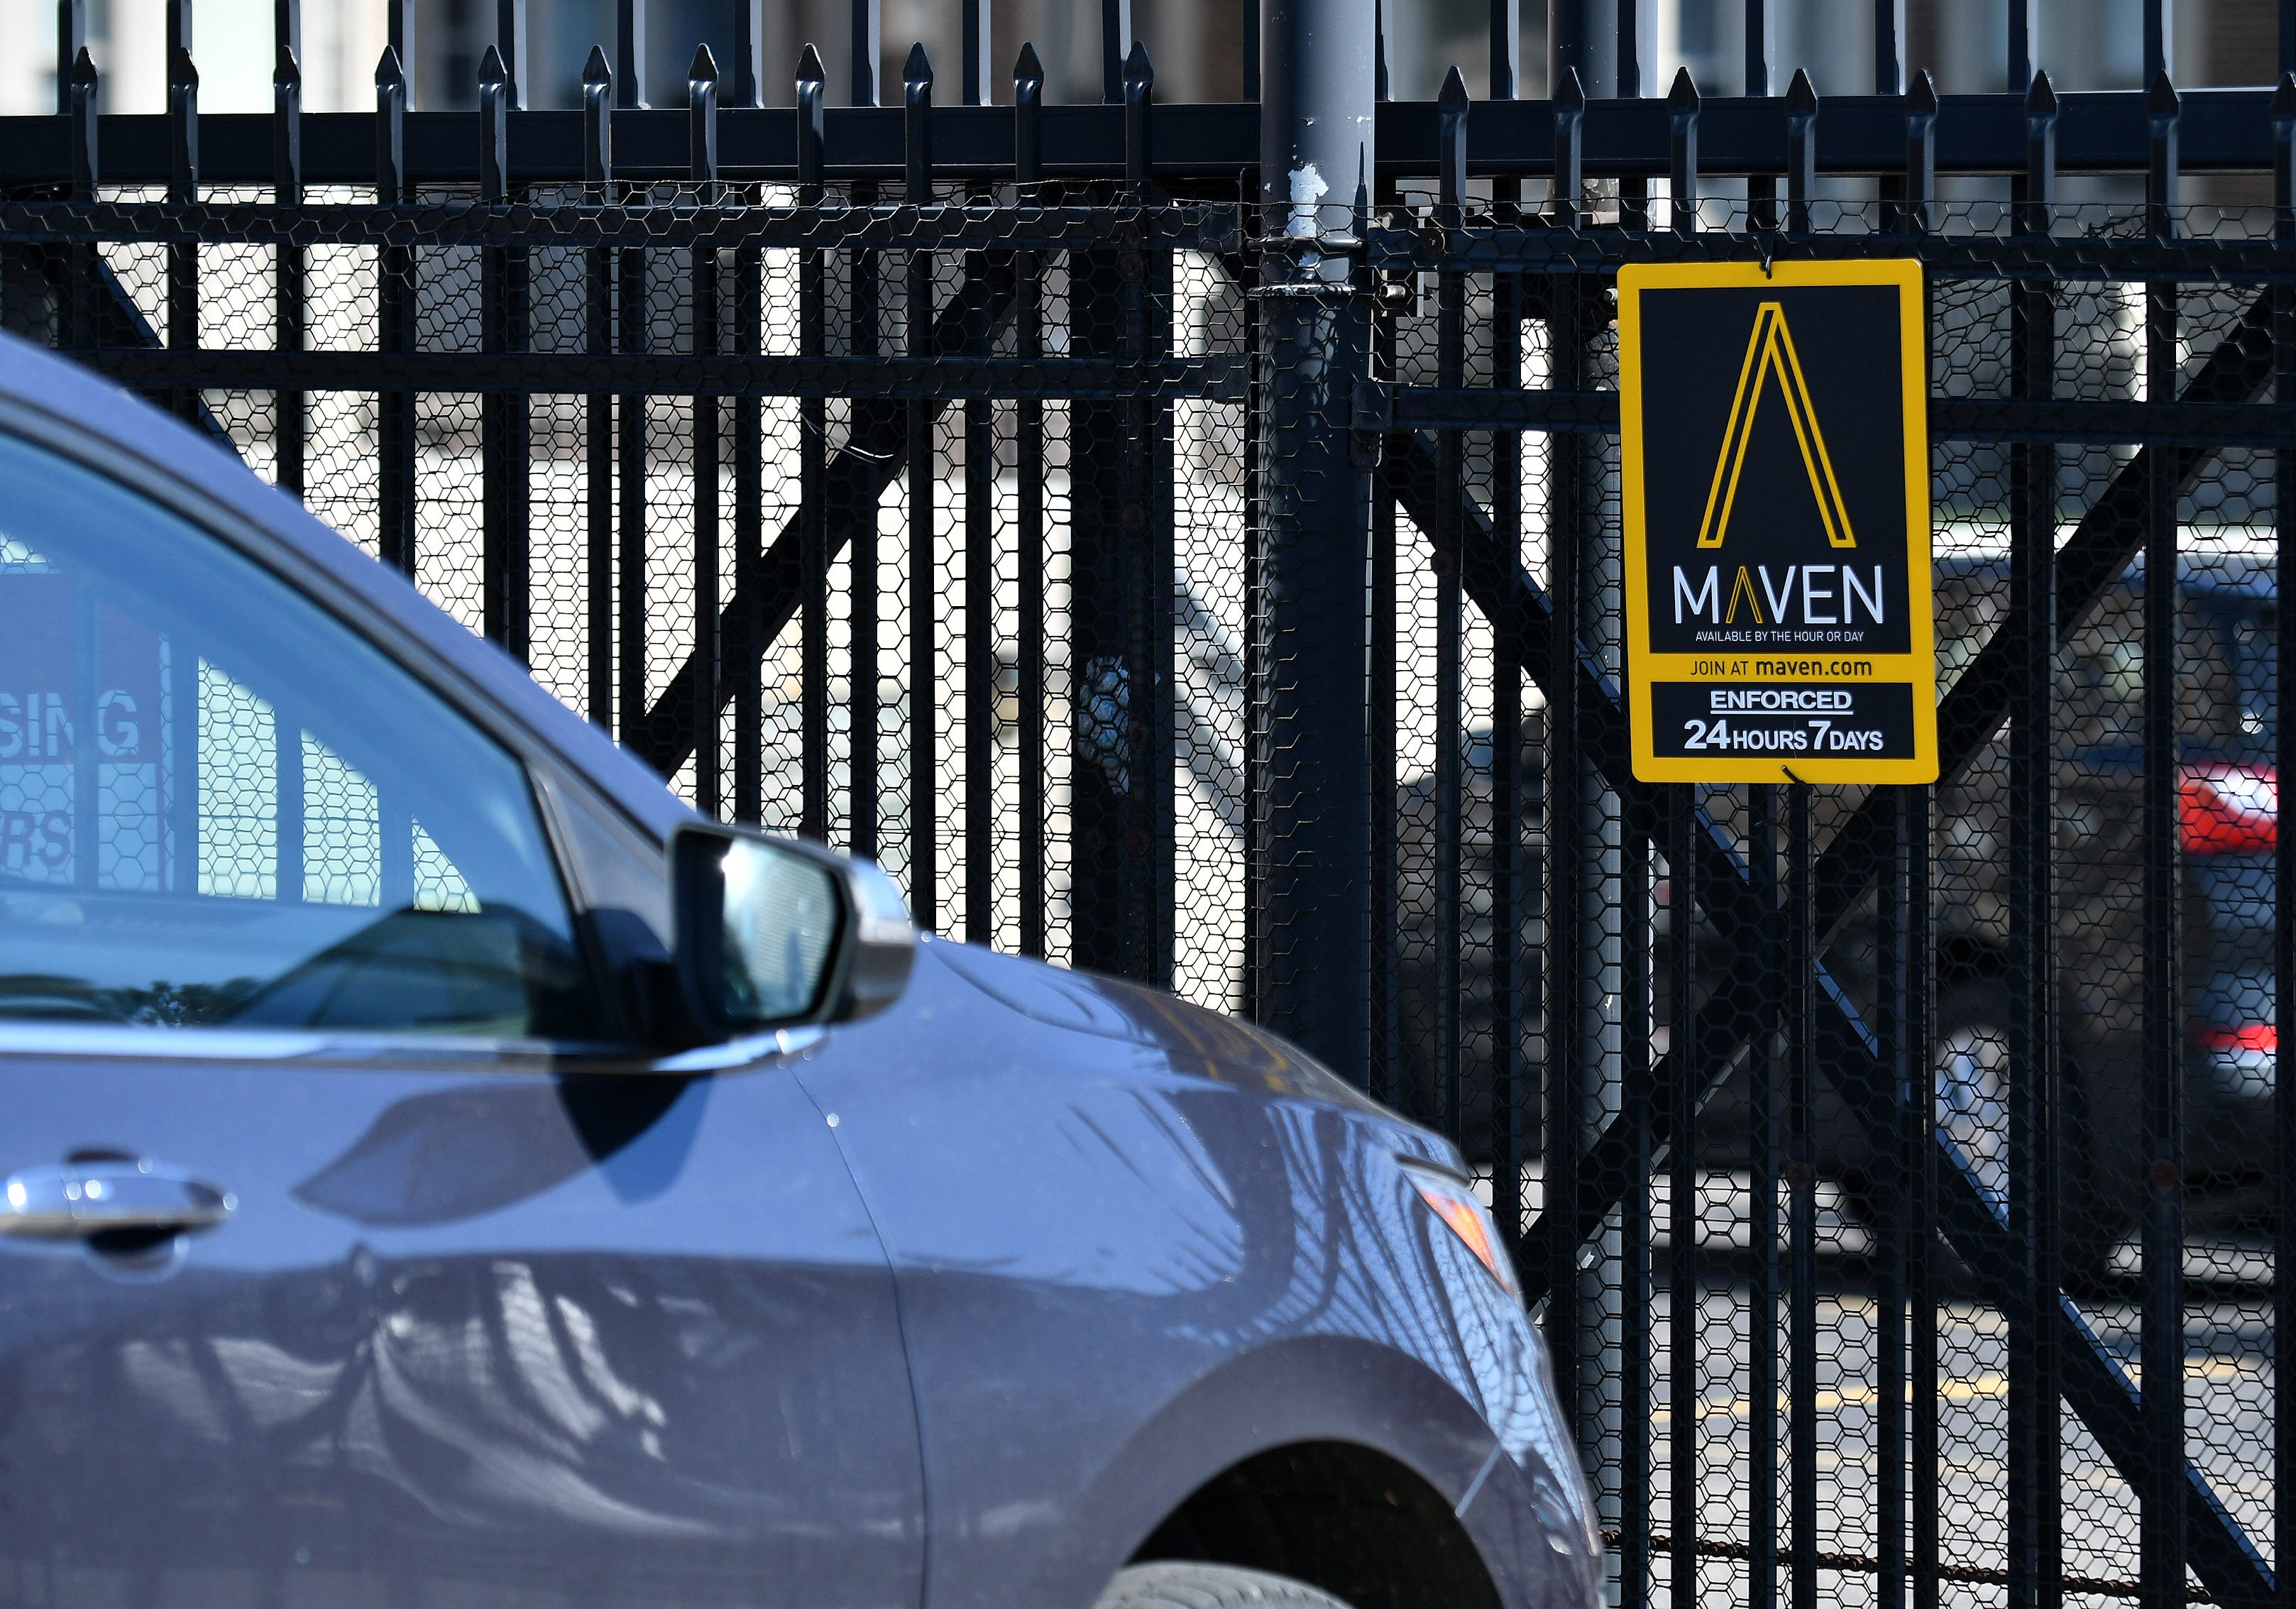 GM will shut down Maven, the car-sharing service it debuted in 2016.